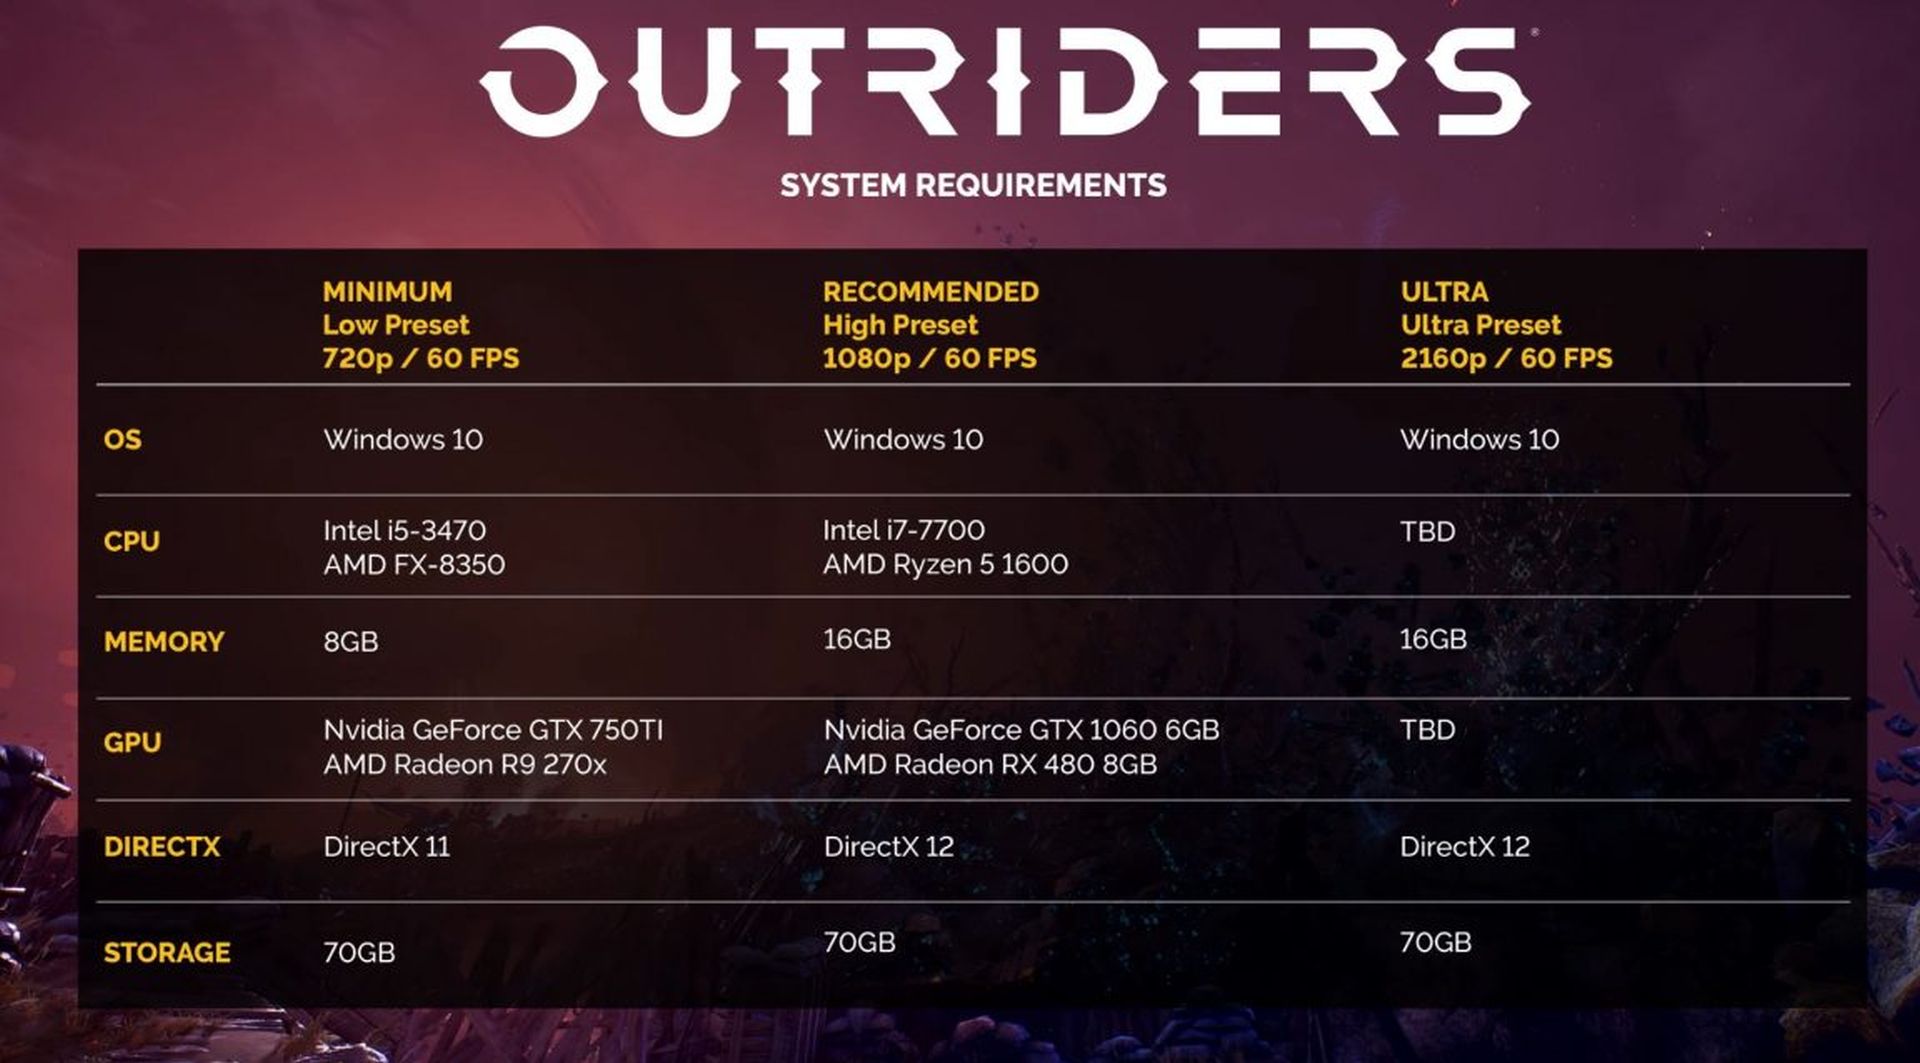 Outriders PC requirements